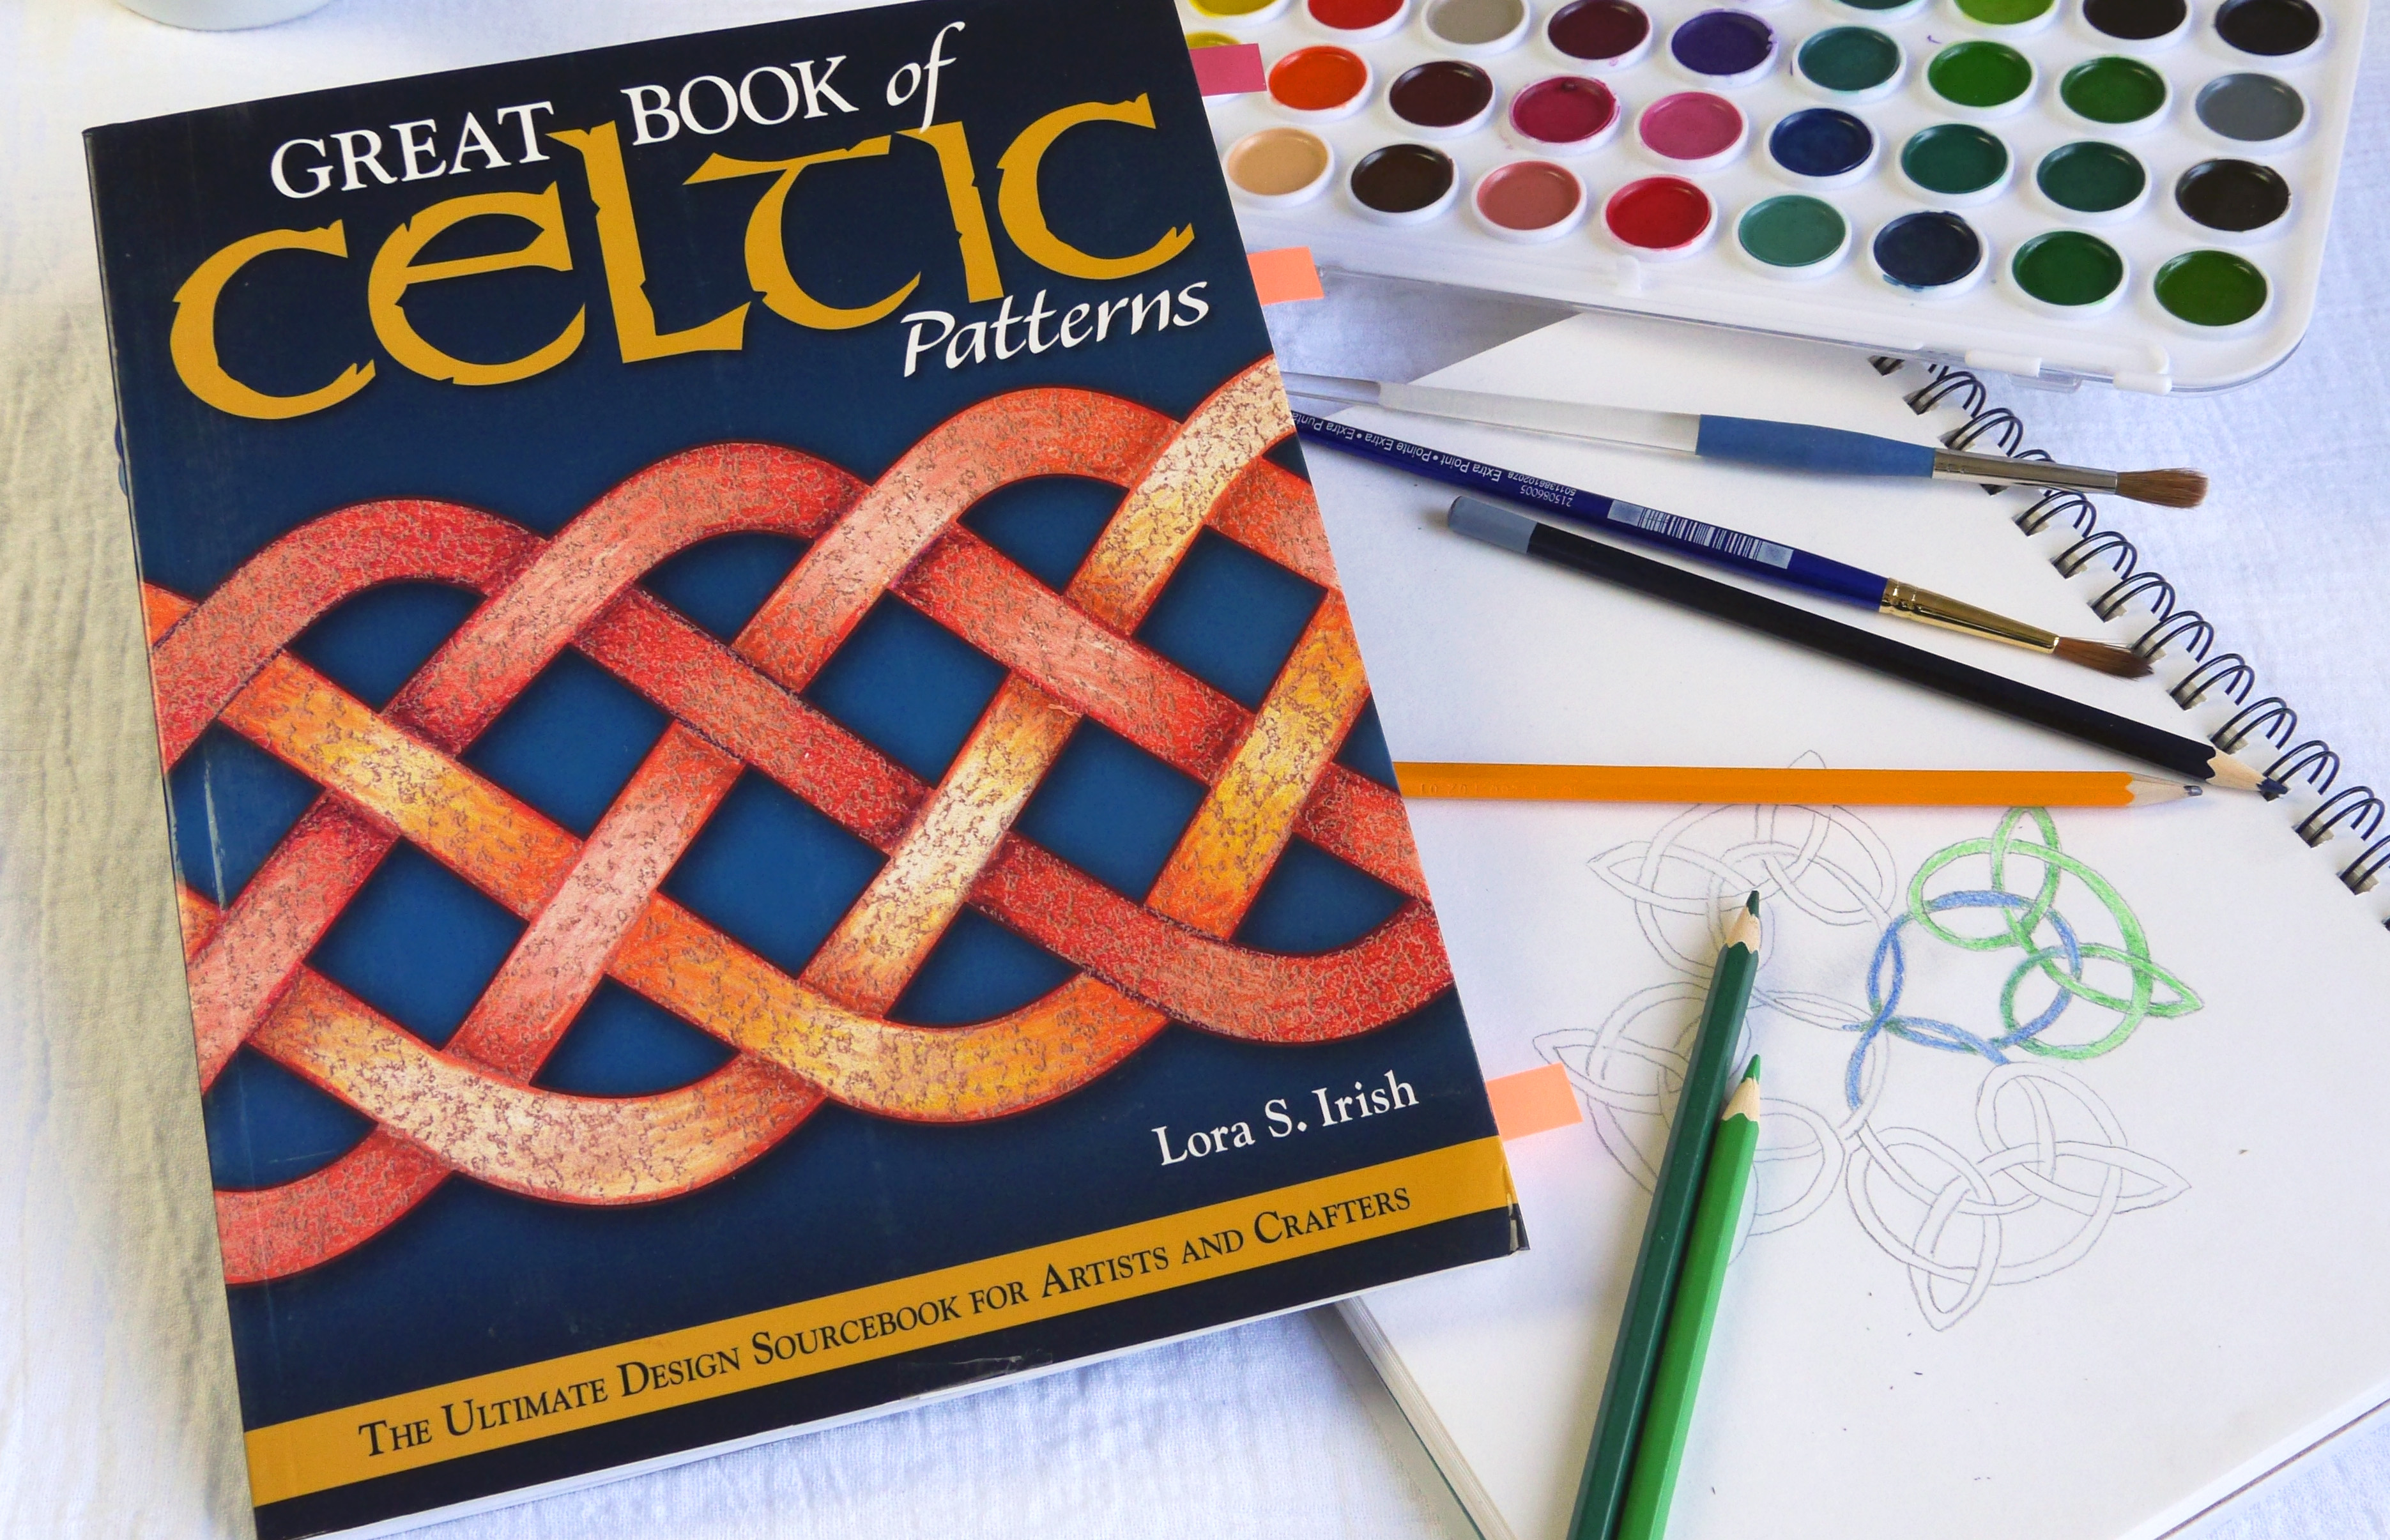 Great Book of Celtic Patterns book with a celtic knot drawing and watercolors.